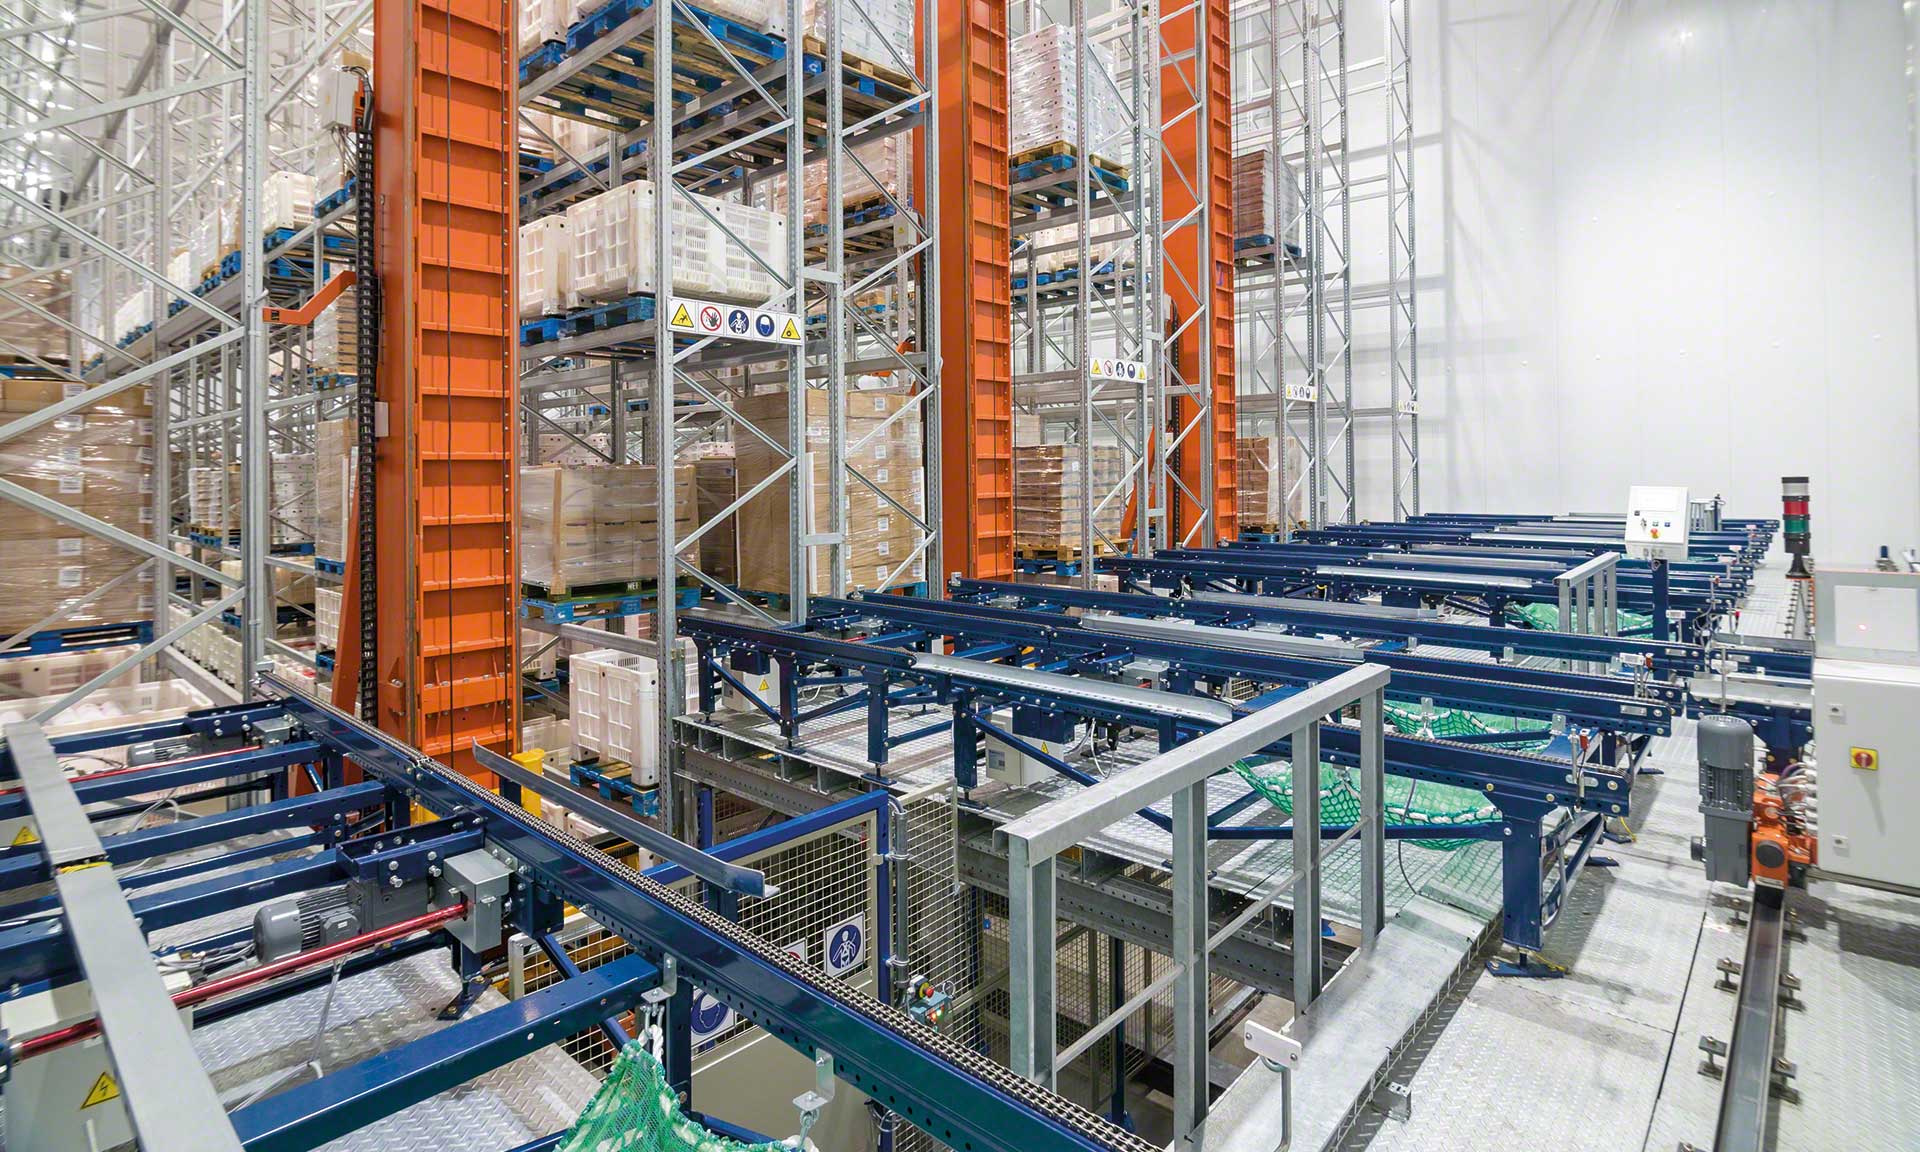 Mecalux has installed an automated warehouse composed of trilateral stacker cranes and a conveyor circuit